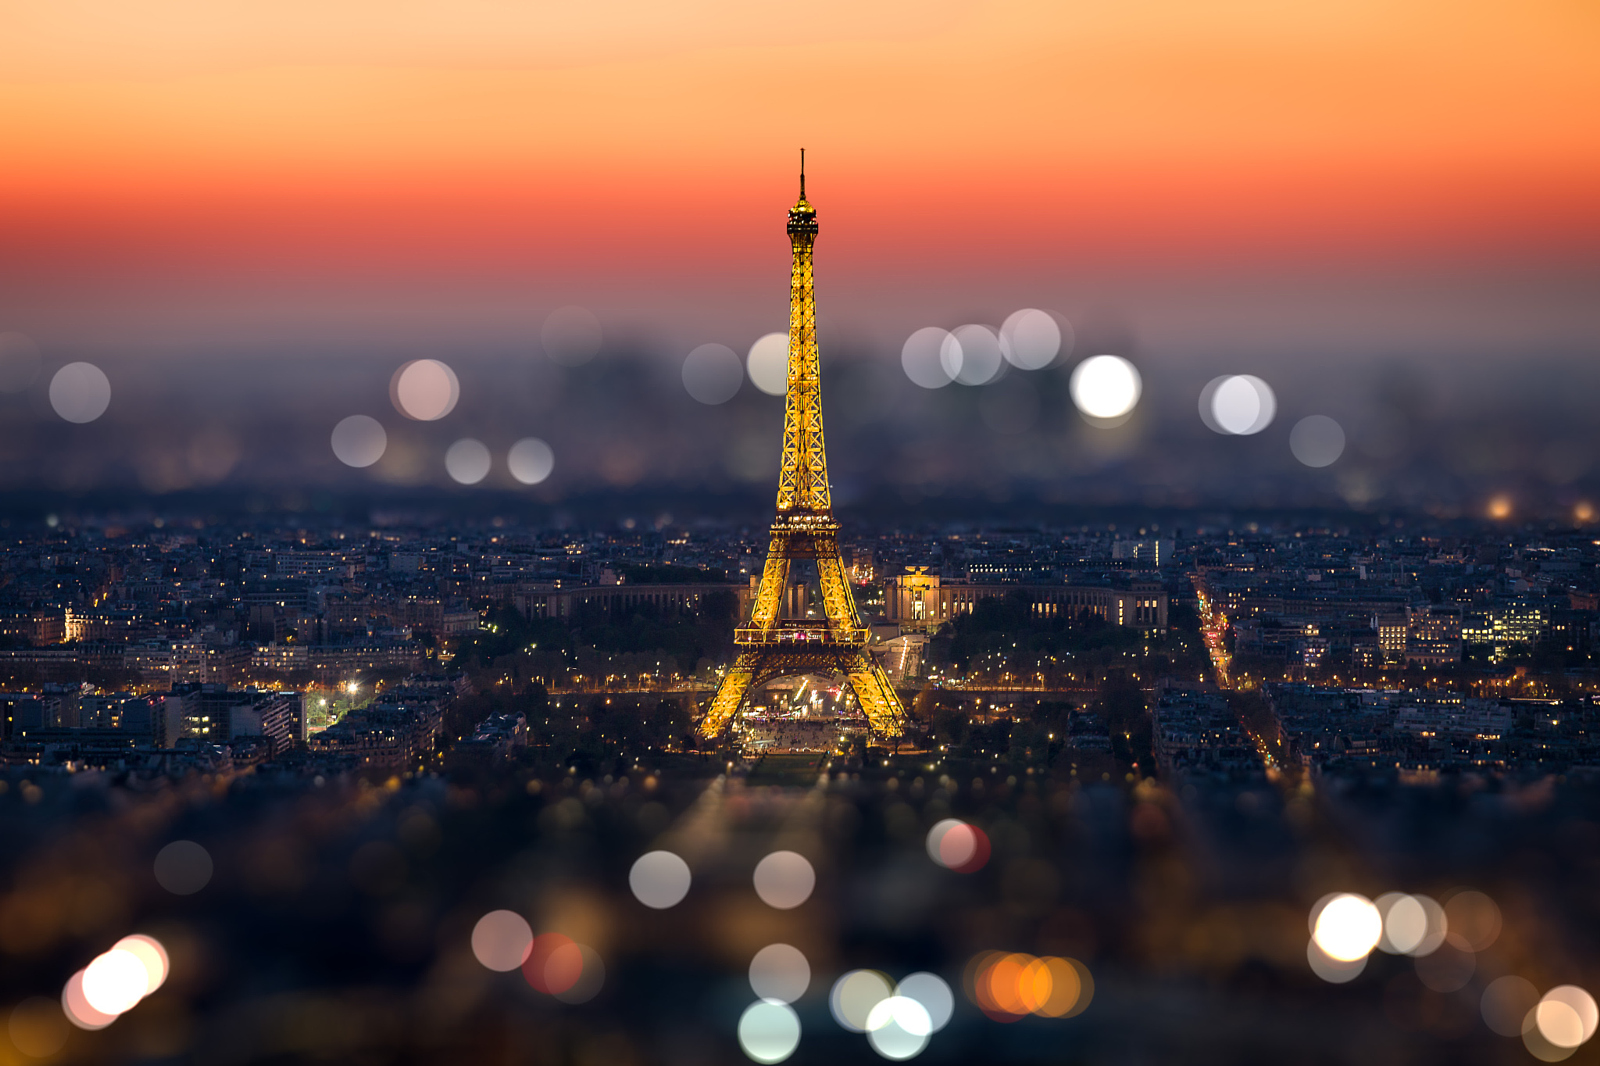 30 Beautiful Bokeh Images to Capture Your Imagination